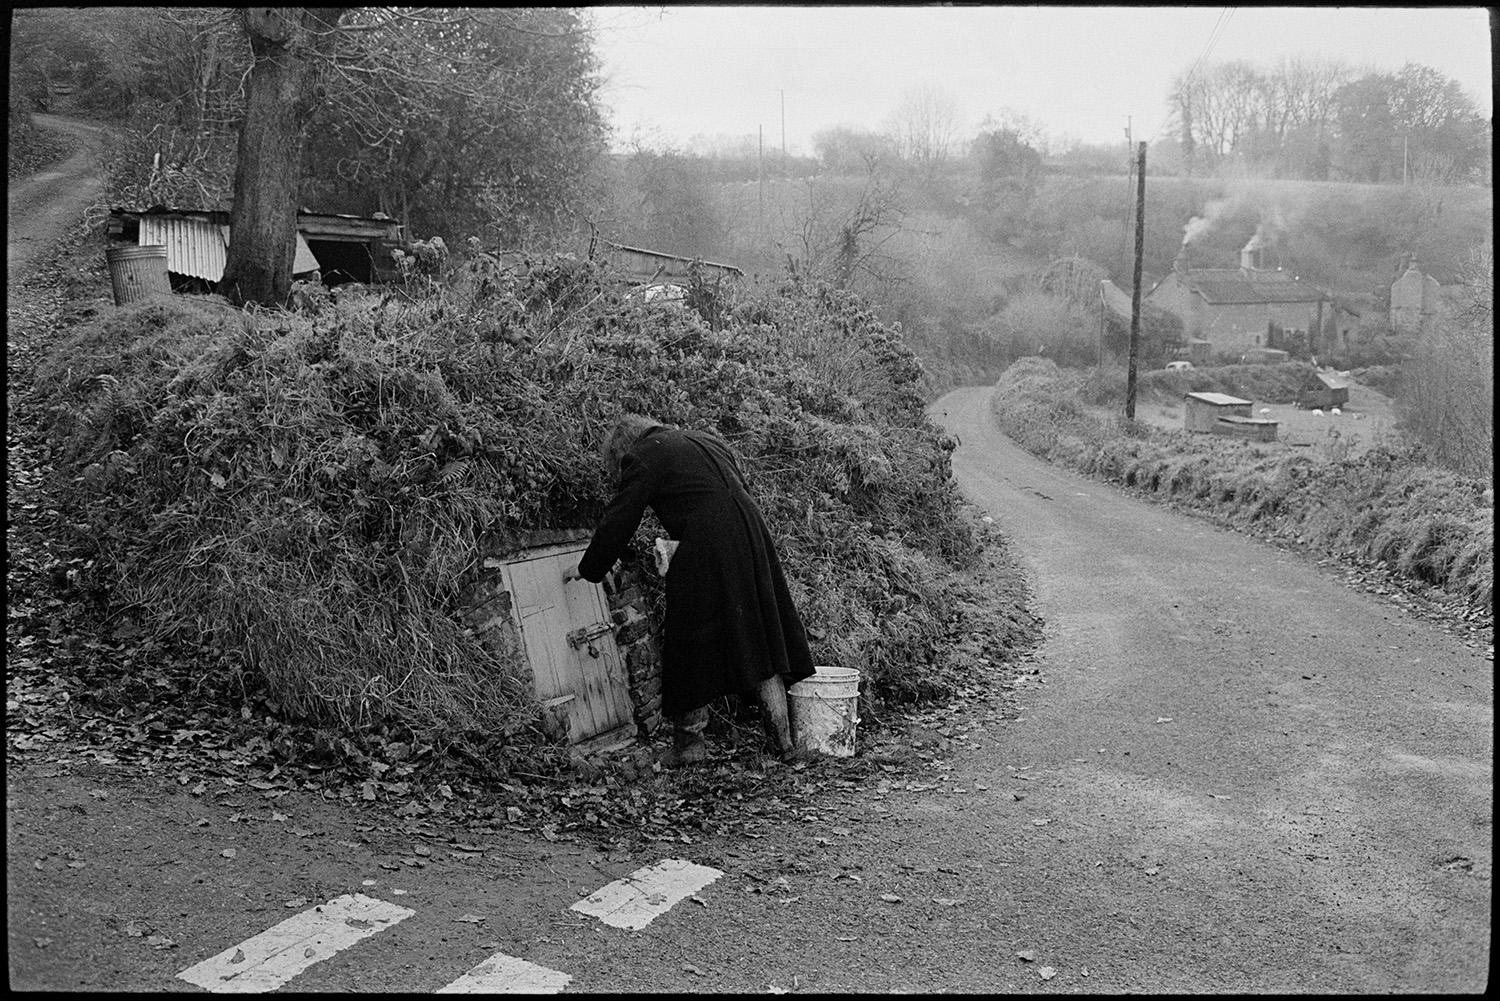 Man taking water from well. 
[Tony Webb getting water from a well behind a wooden door in a hedgebank by a road junction at Millhams, Dolton. Smoke can be seen rising from cottage chimneys in the background.]